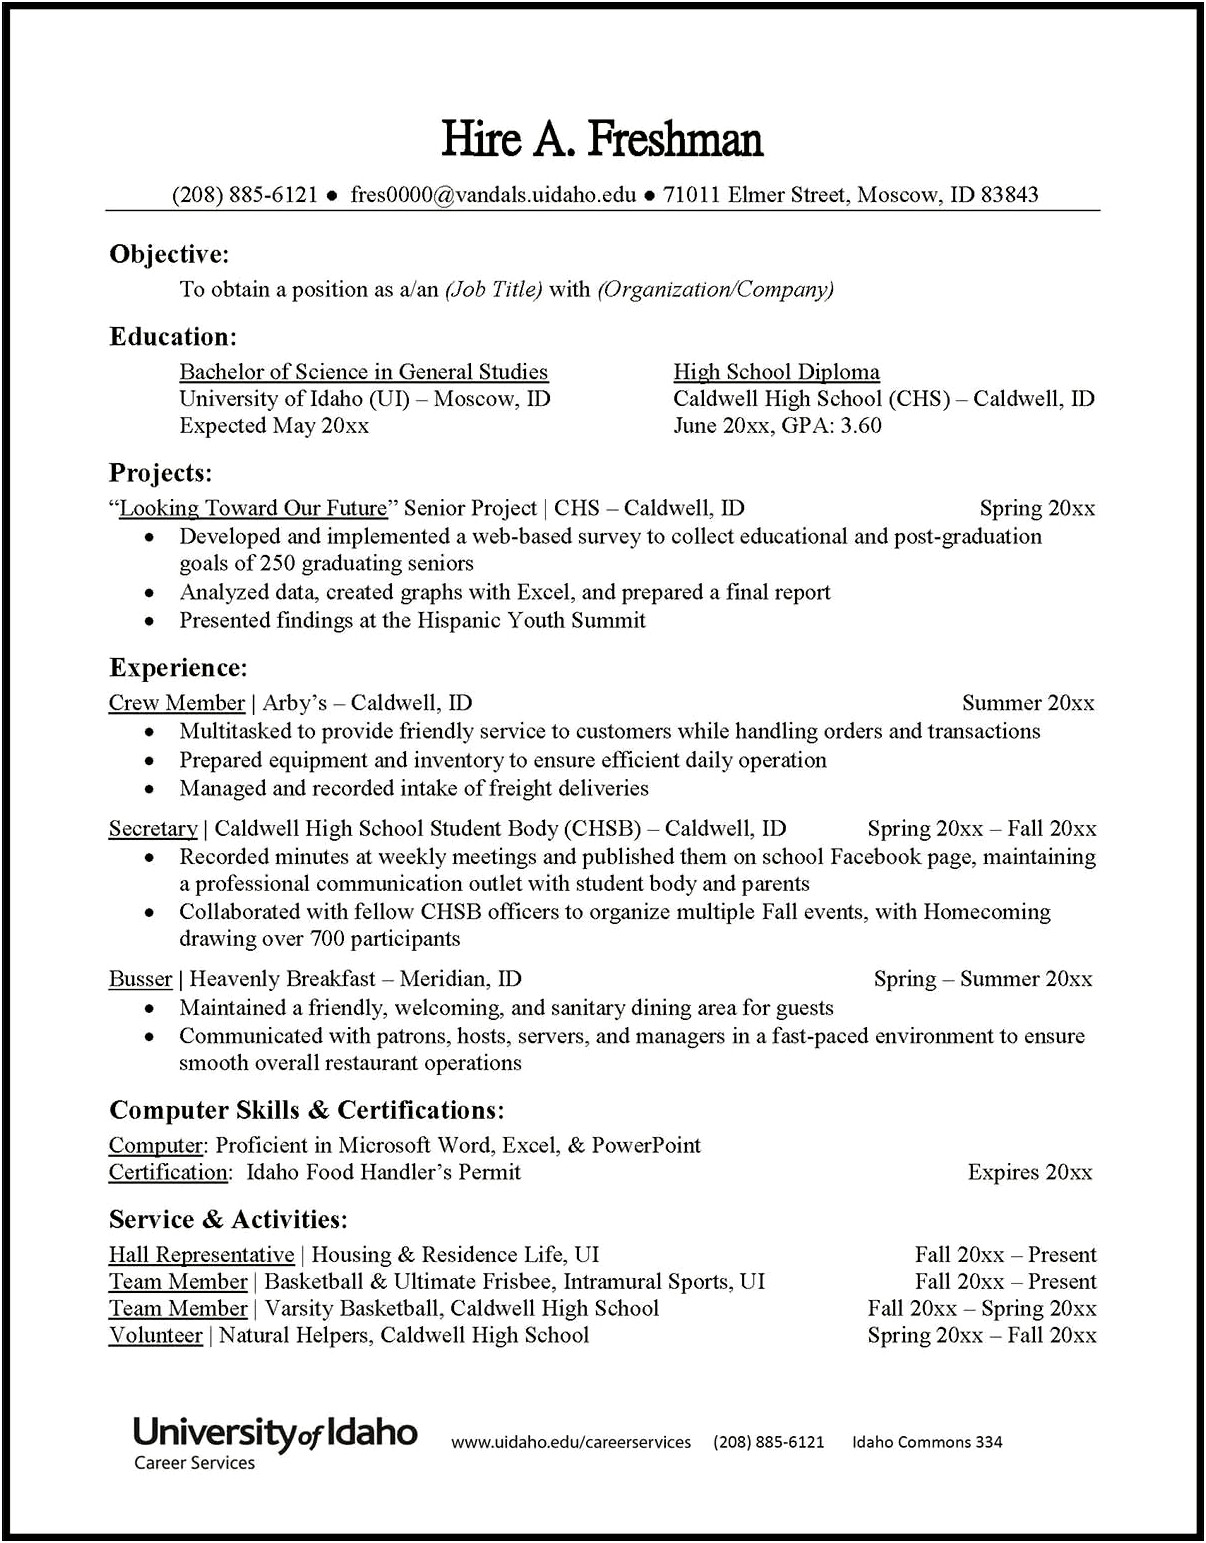 Objective For Resume On Campus Job